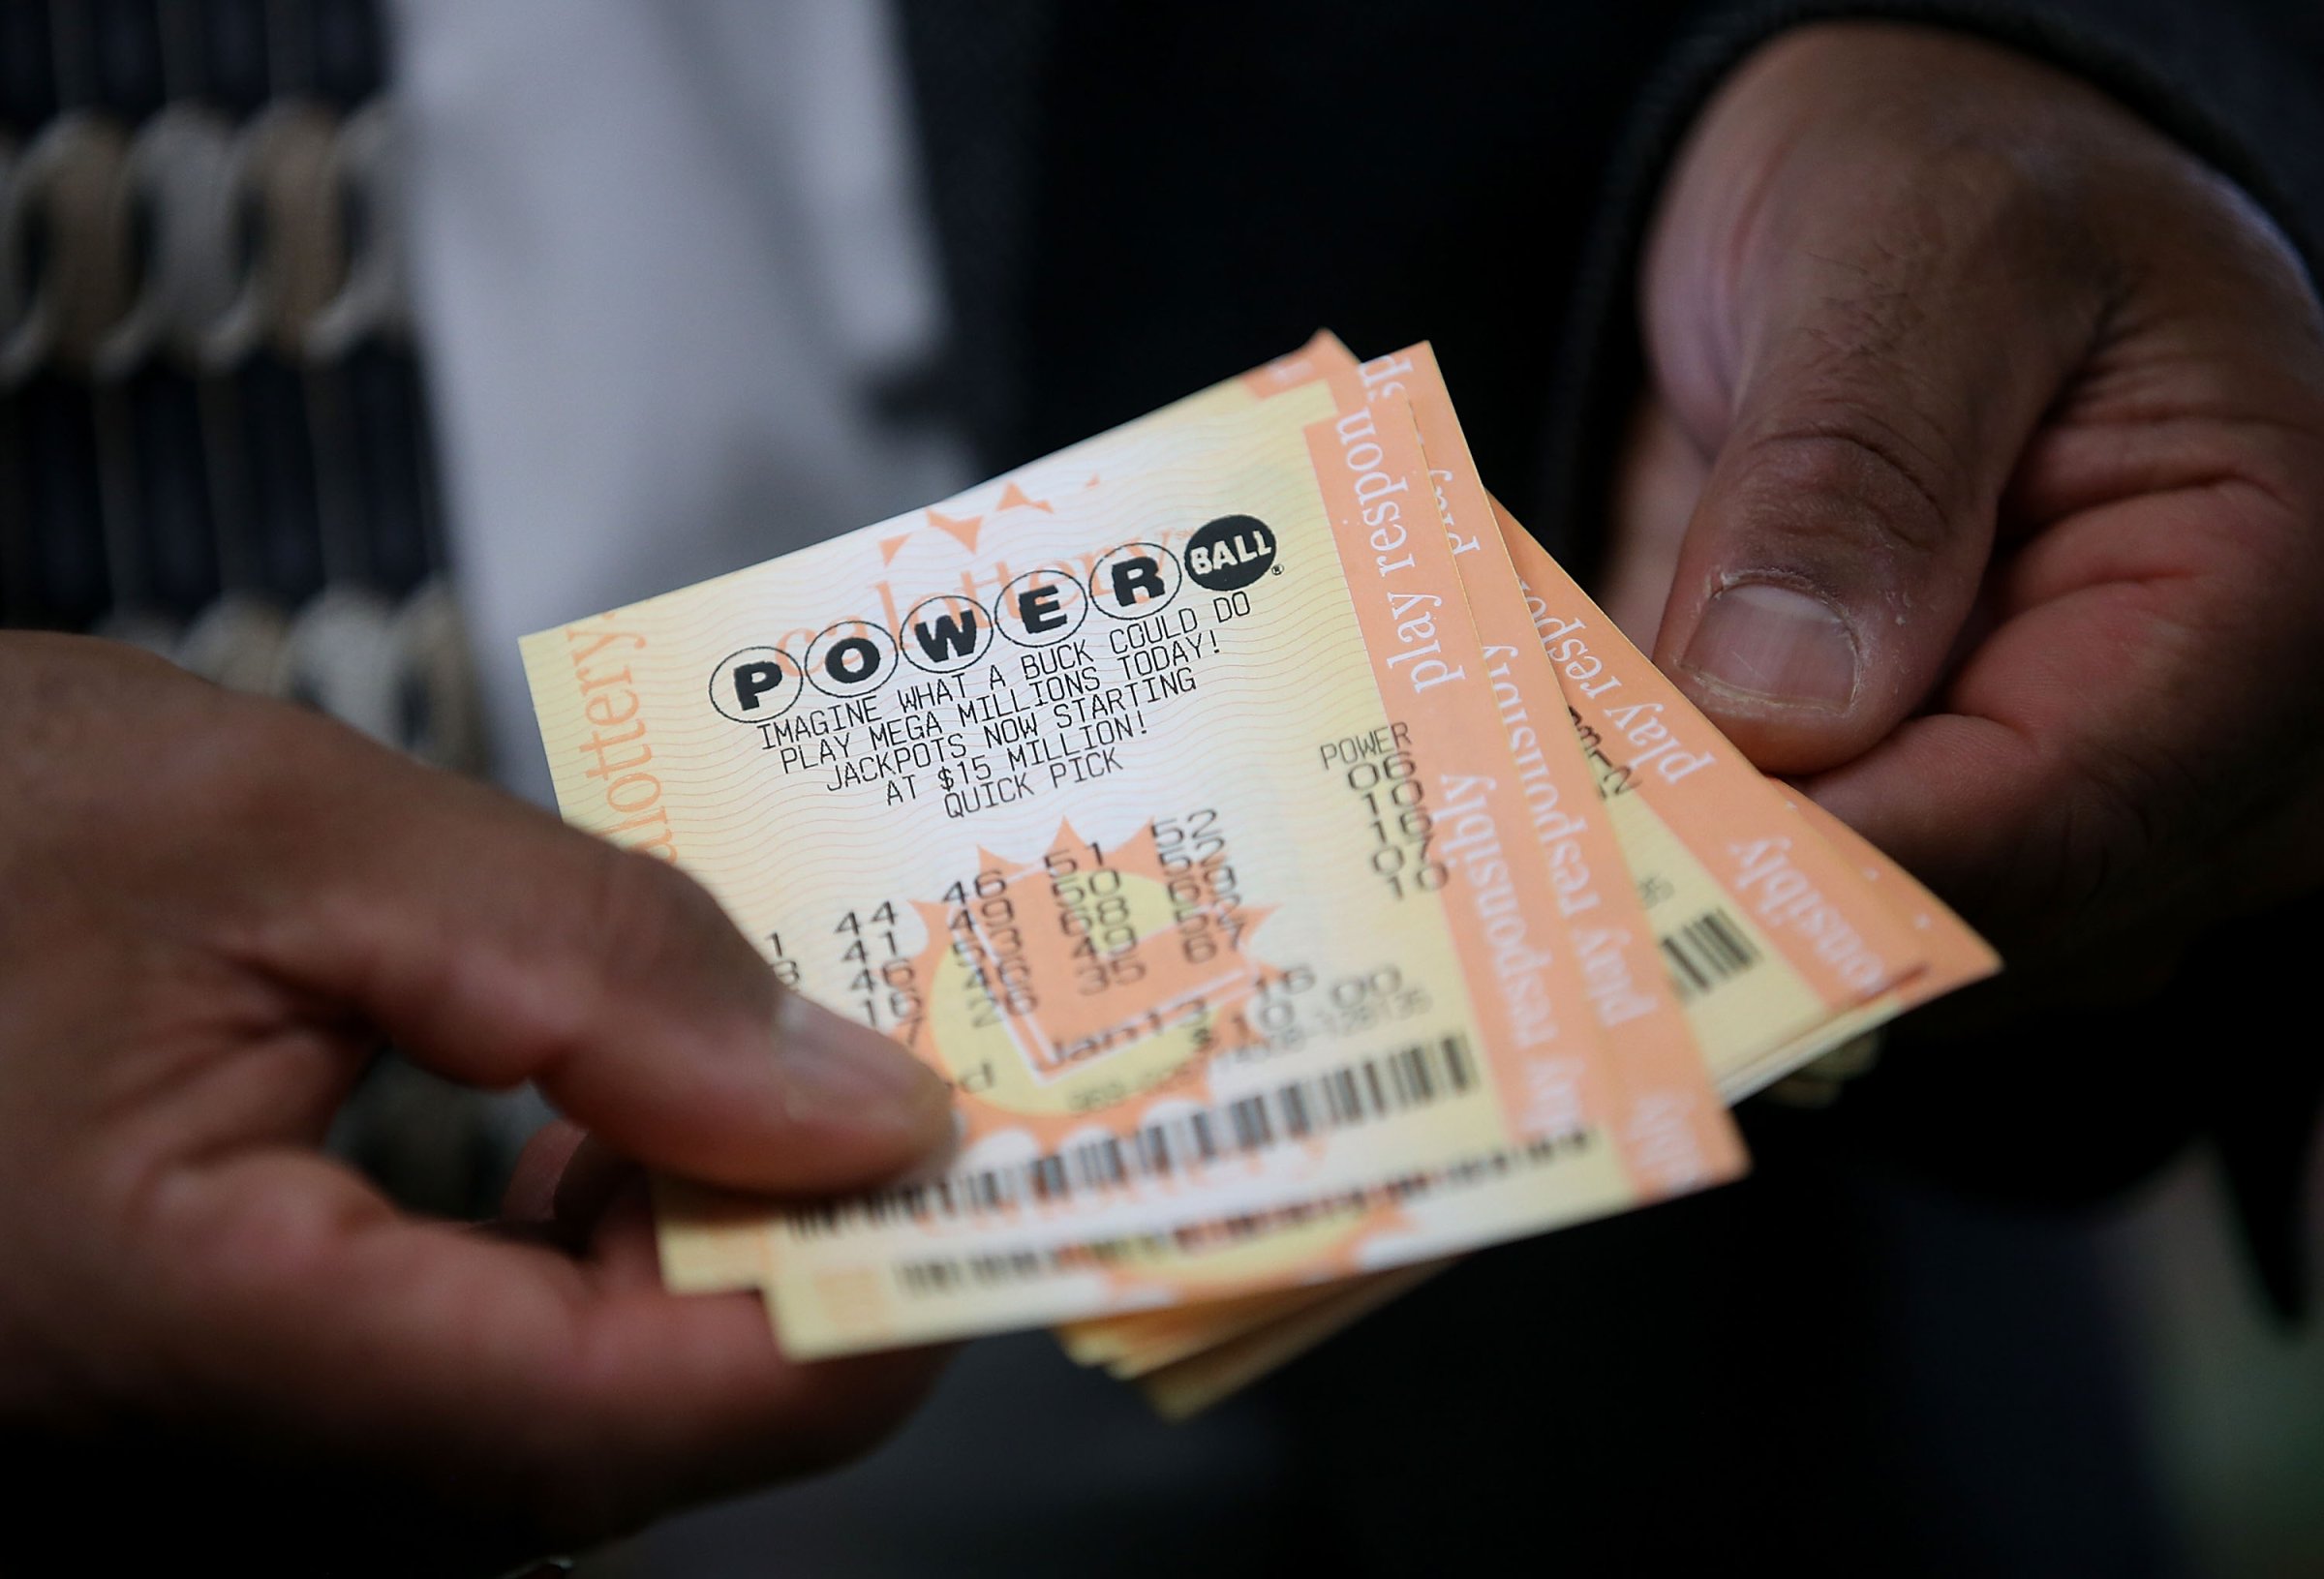 A customer holds Powerball tickets that he purchased at Kavanagh Liquors on January 12, 2015 in San Lorenzo, California.